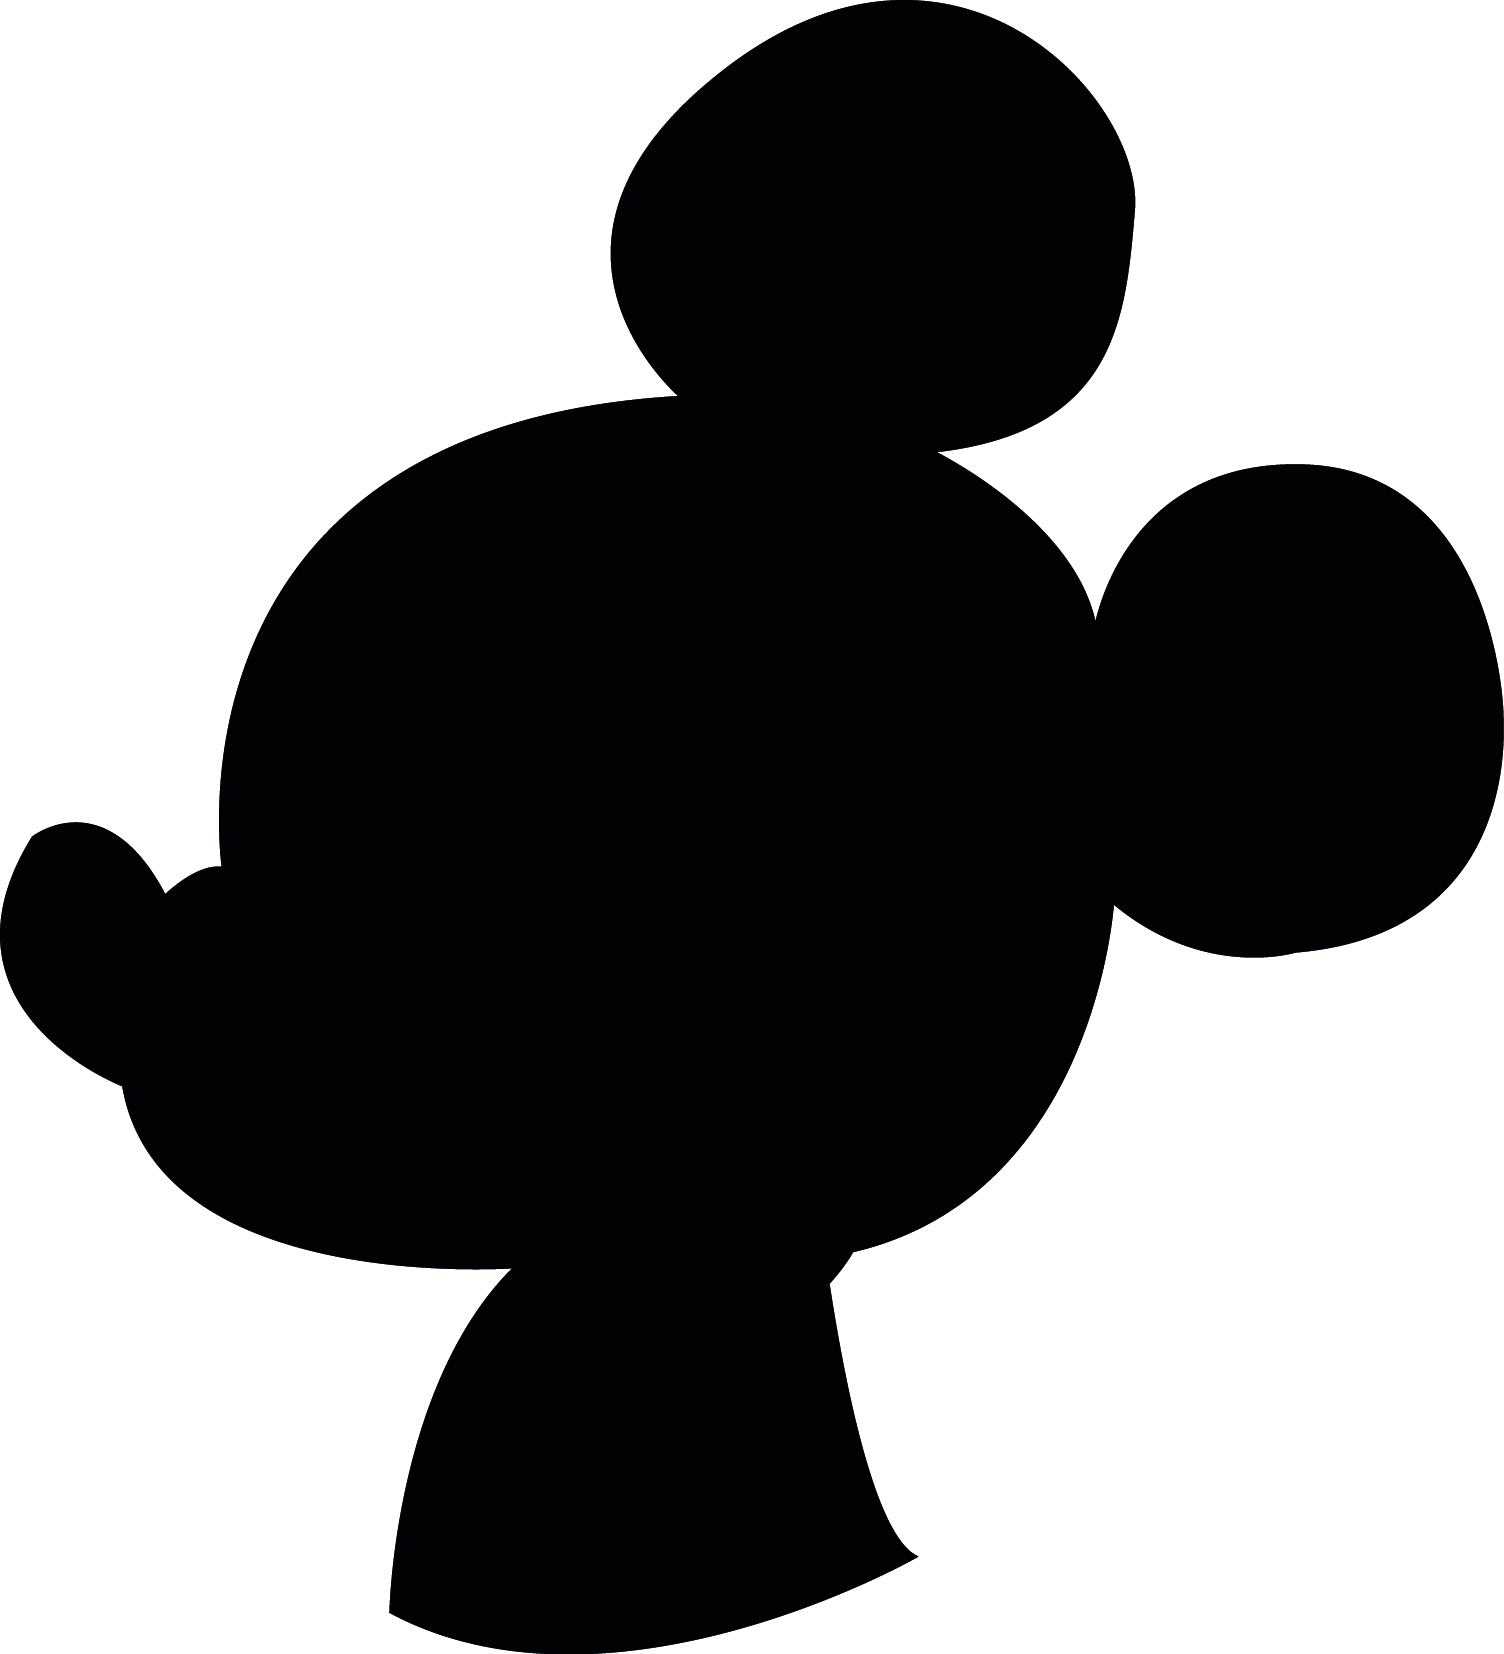 Downloadable Disney Mickey, Donald and Goofy Silhouettes - Food in 